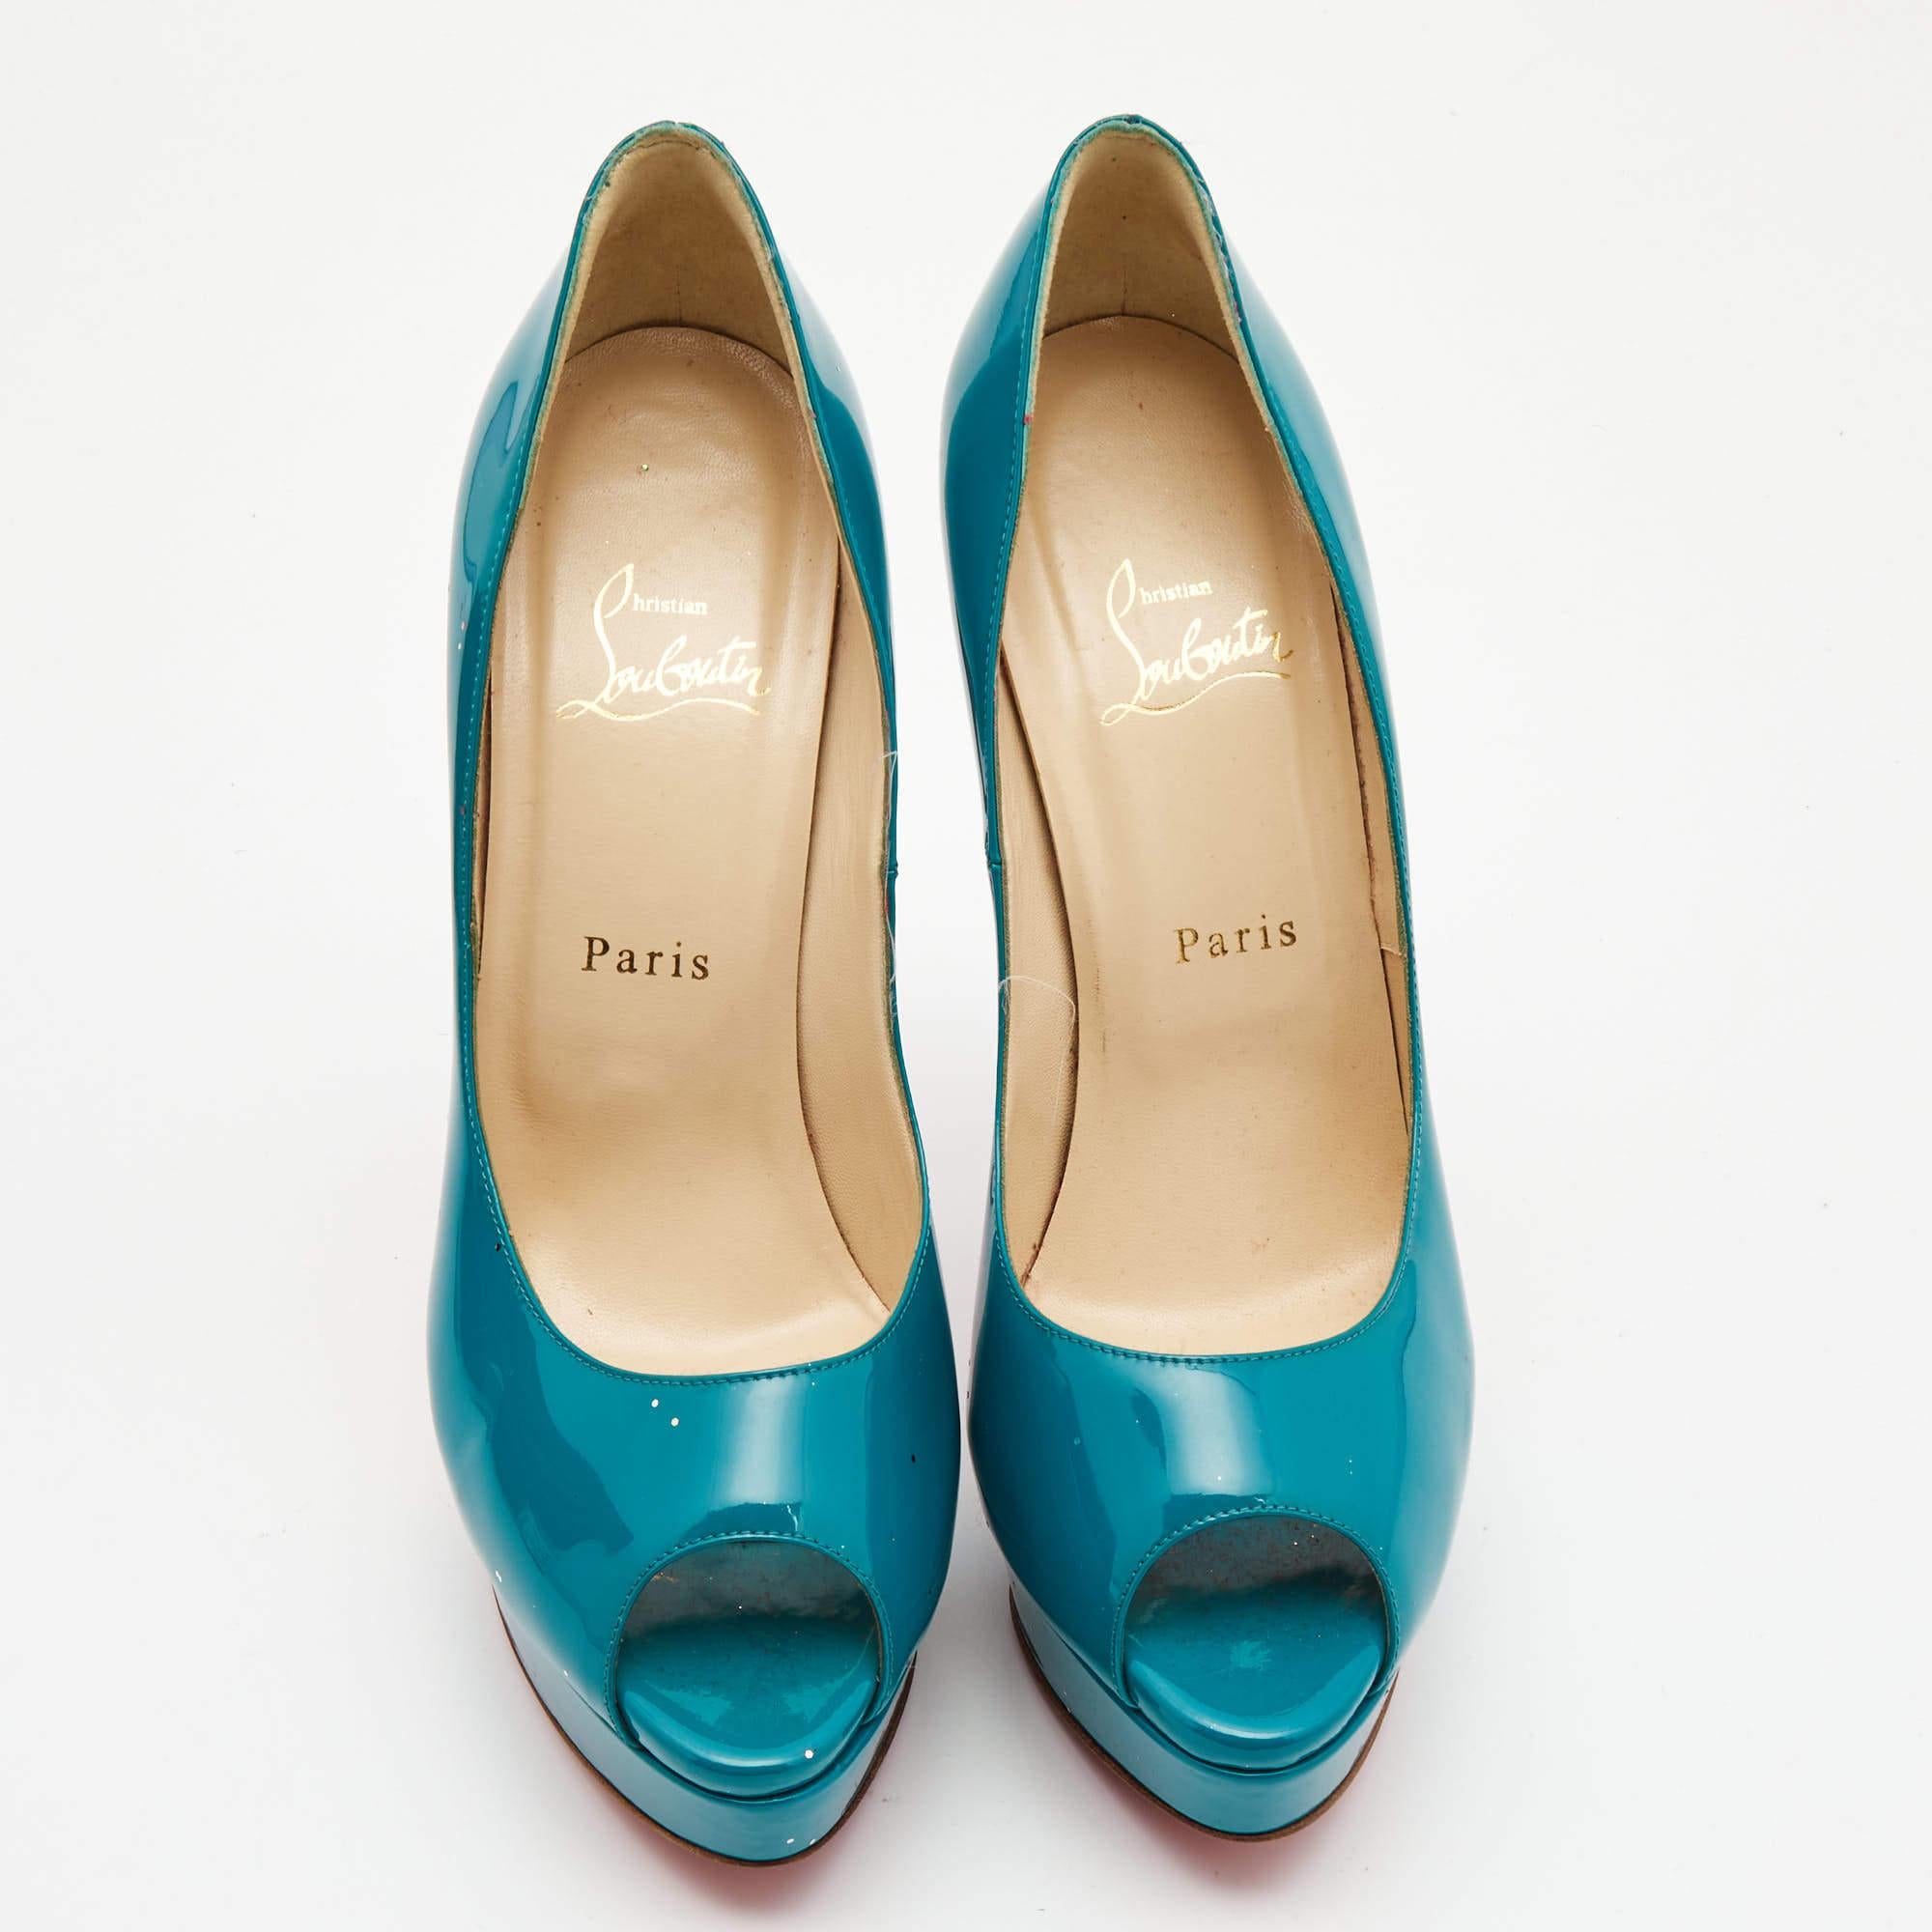 Christian Louboutin Teal Green Patent Leather Lady Peep Pumps Size 40 4